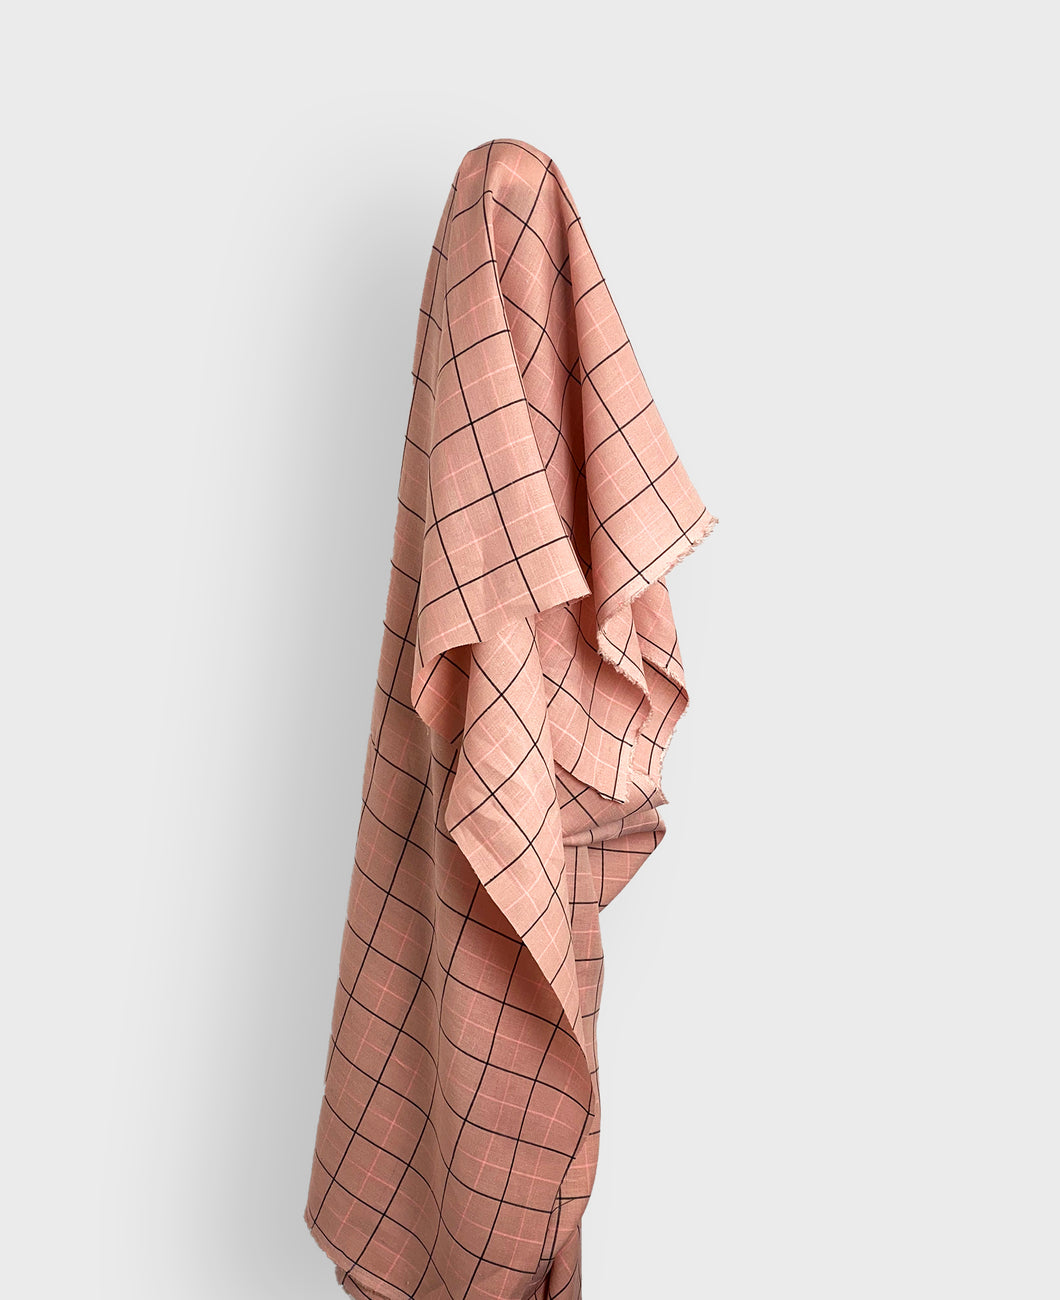 Blush Check 100% Linen 125 gsm was $45 pm now $30 pm